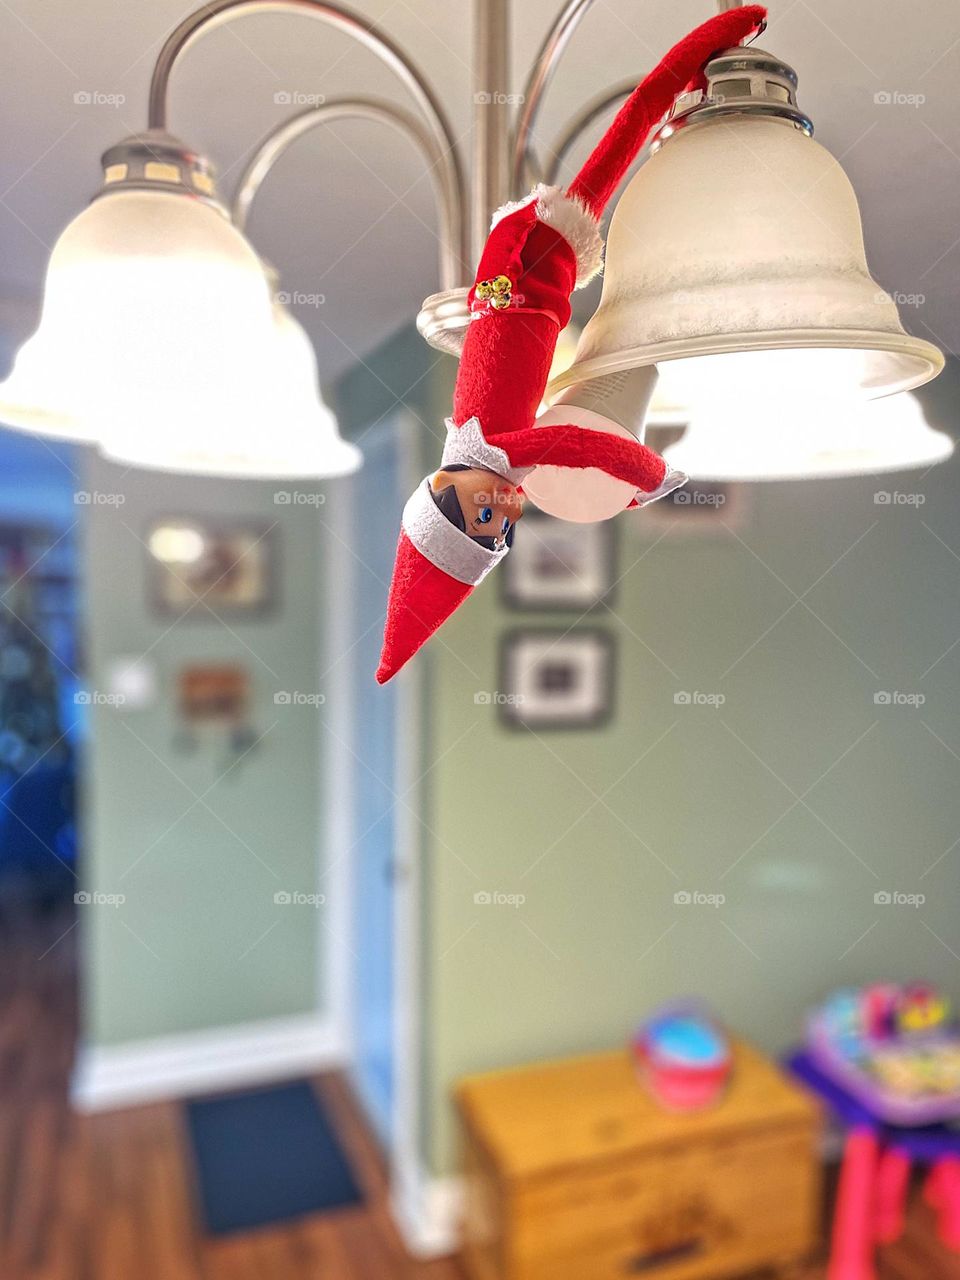 Elf on the shelf changes a light bulb, elf on the shelf hangs upside down, elf on the shelf helping with household chores, marking off the to do list, elf on the shelf antics, ideas for elf on the shelf, elf on the shelf helper 